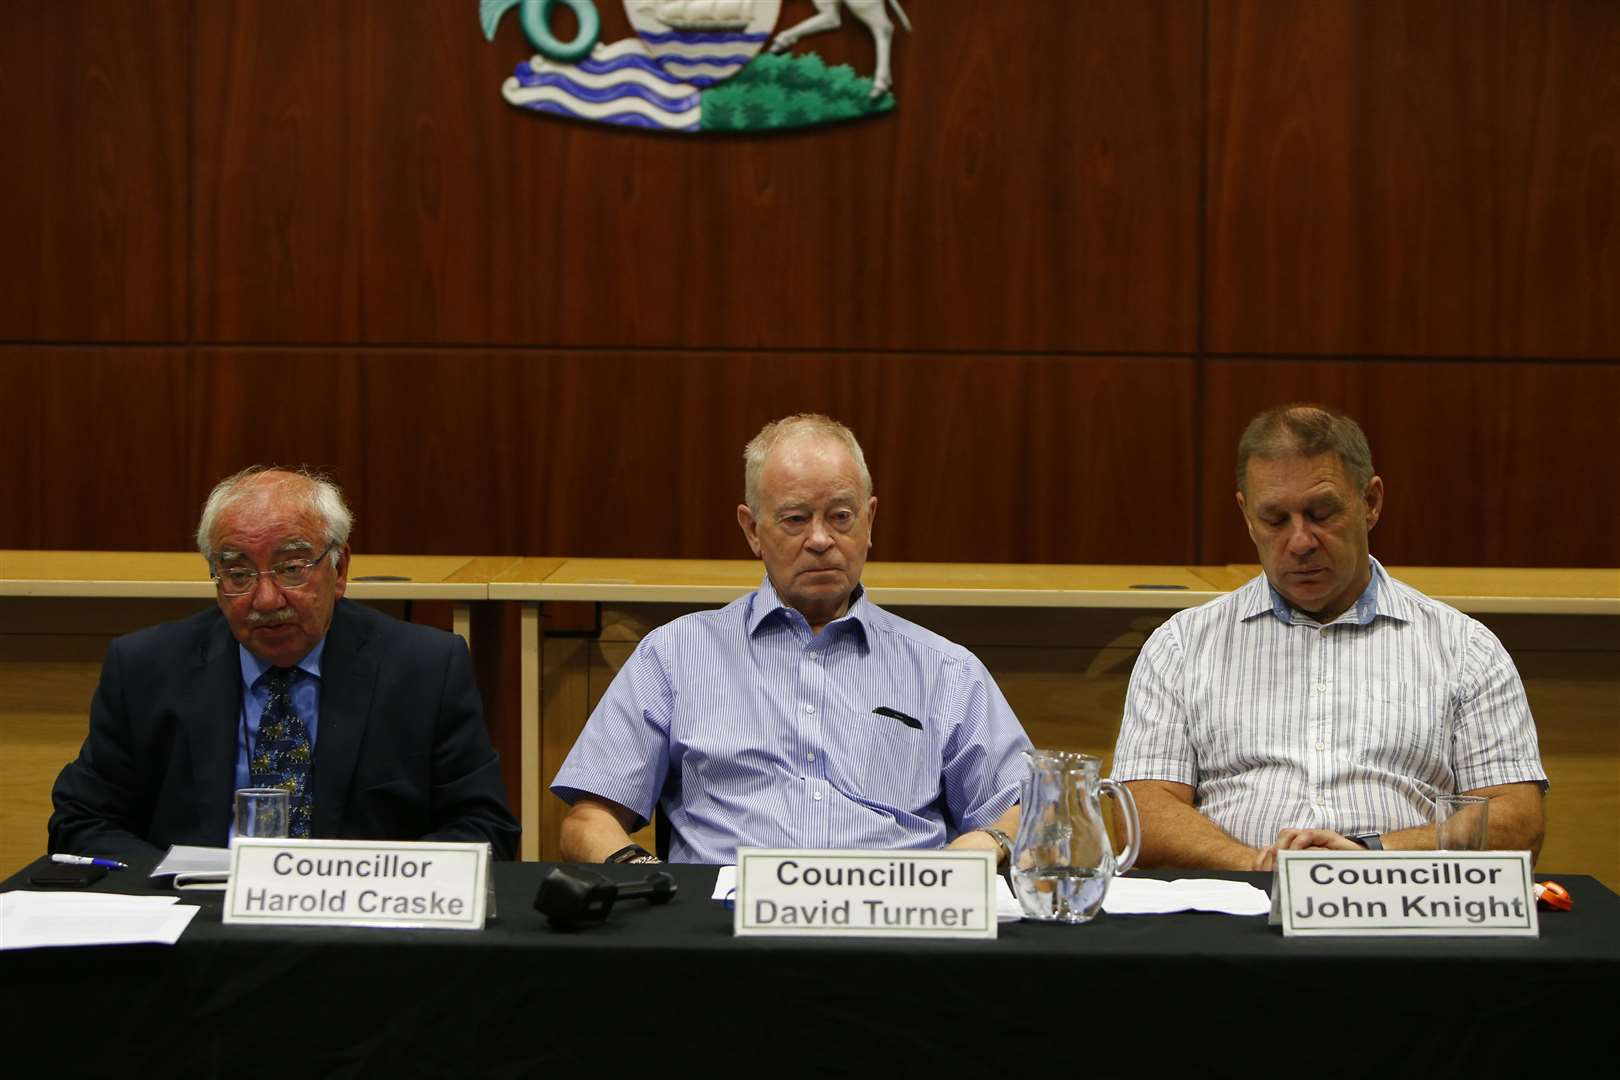 From left, Cllr Harold Craske, Cllr David Turner and Cllr John Knight at a press conference in August announcing the breakaway from the Gravesham Conservative group